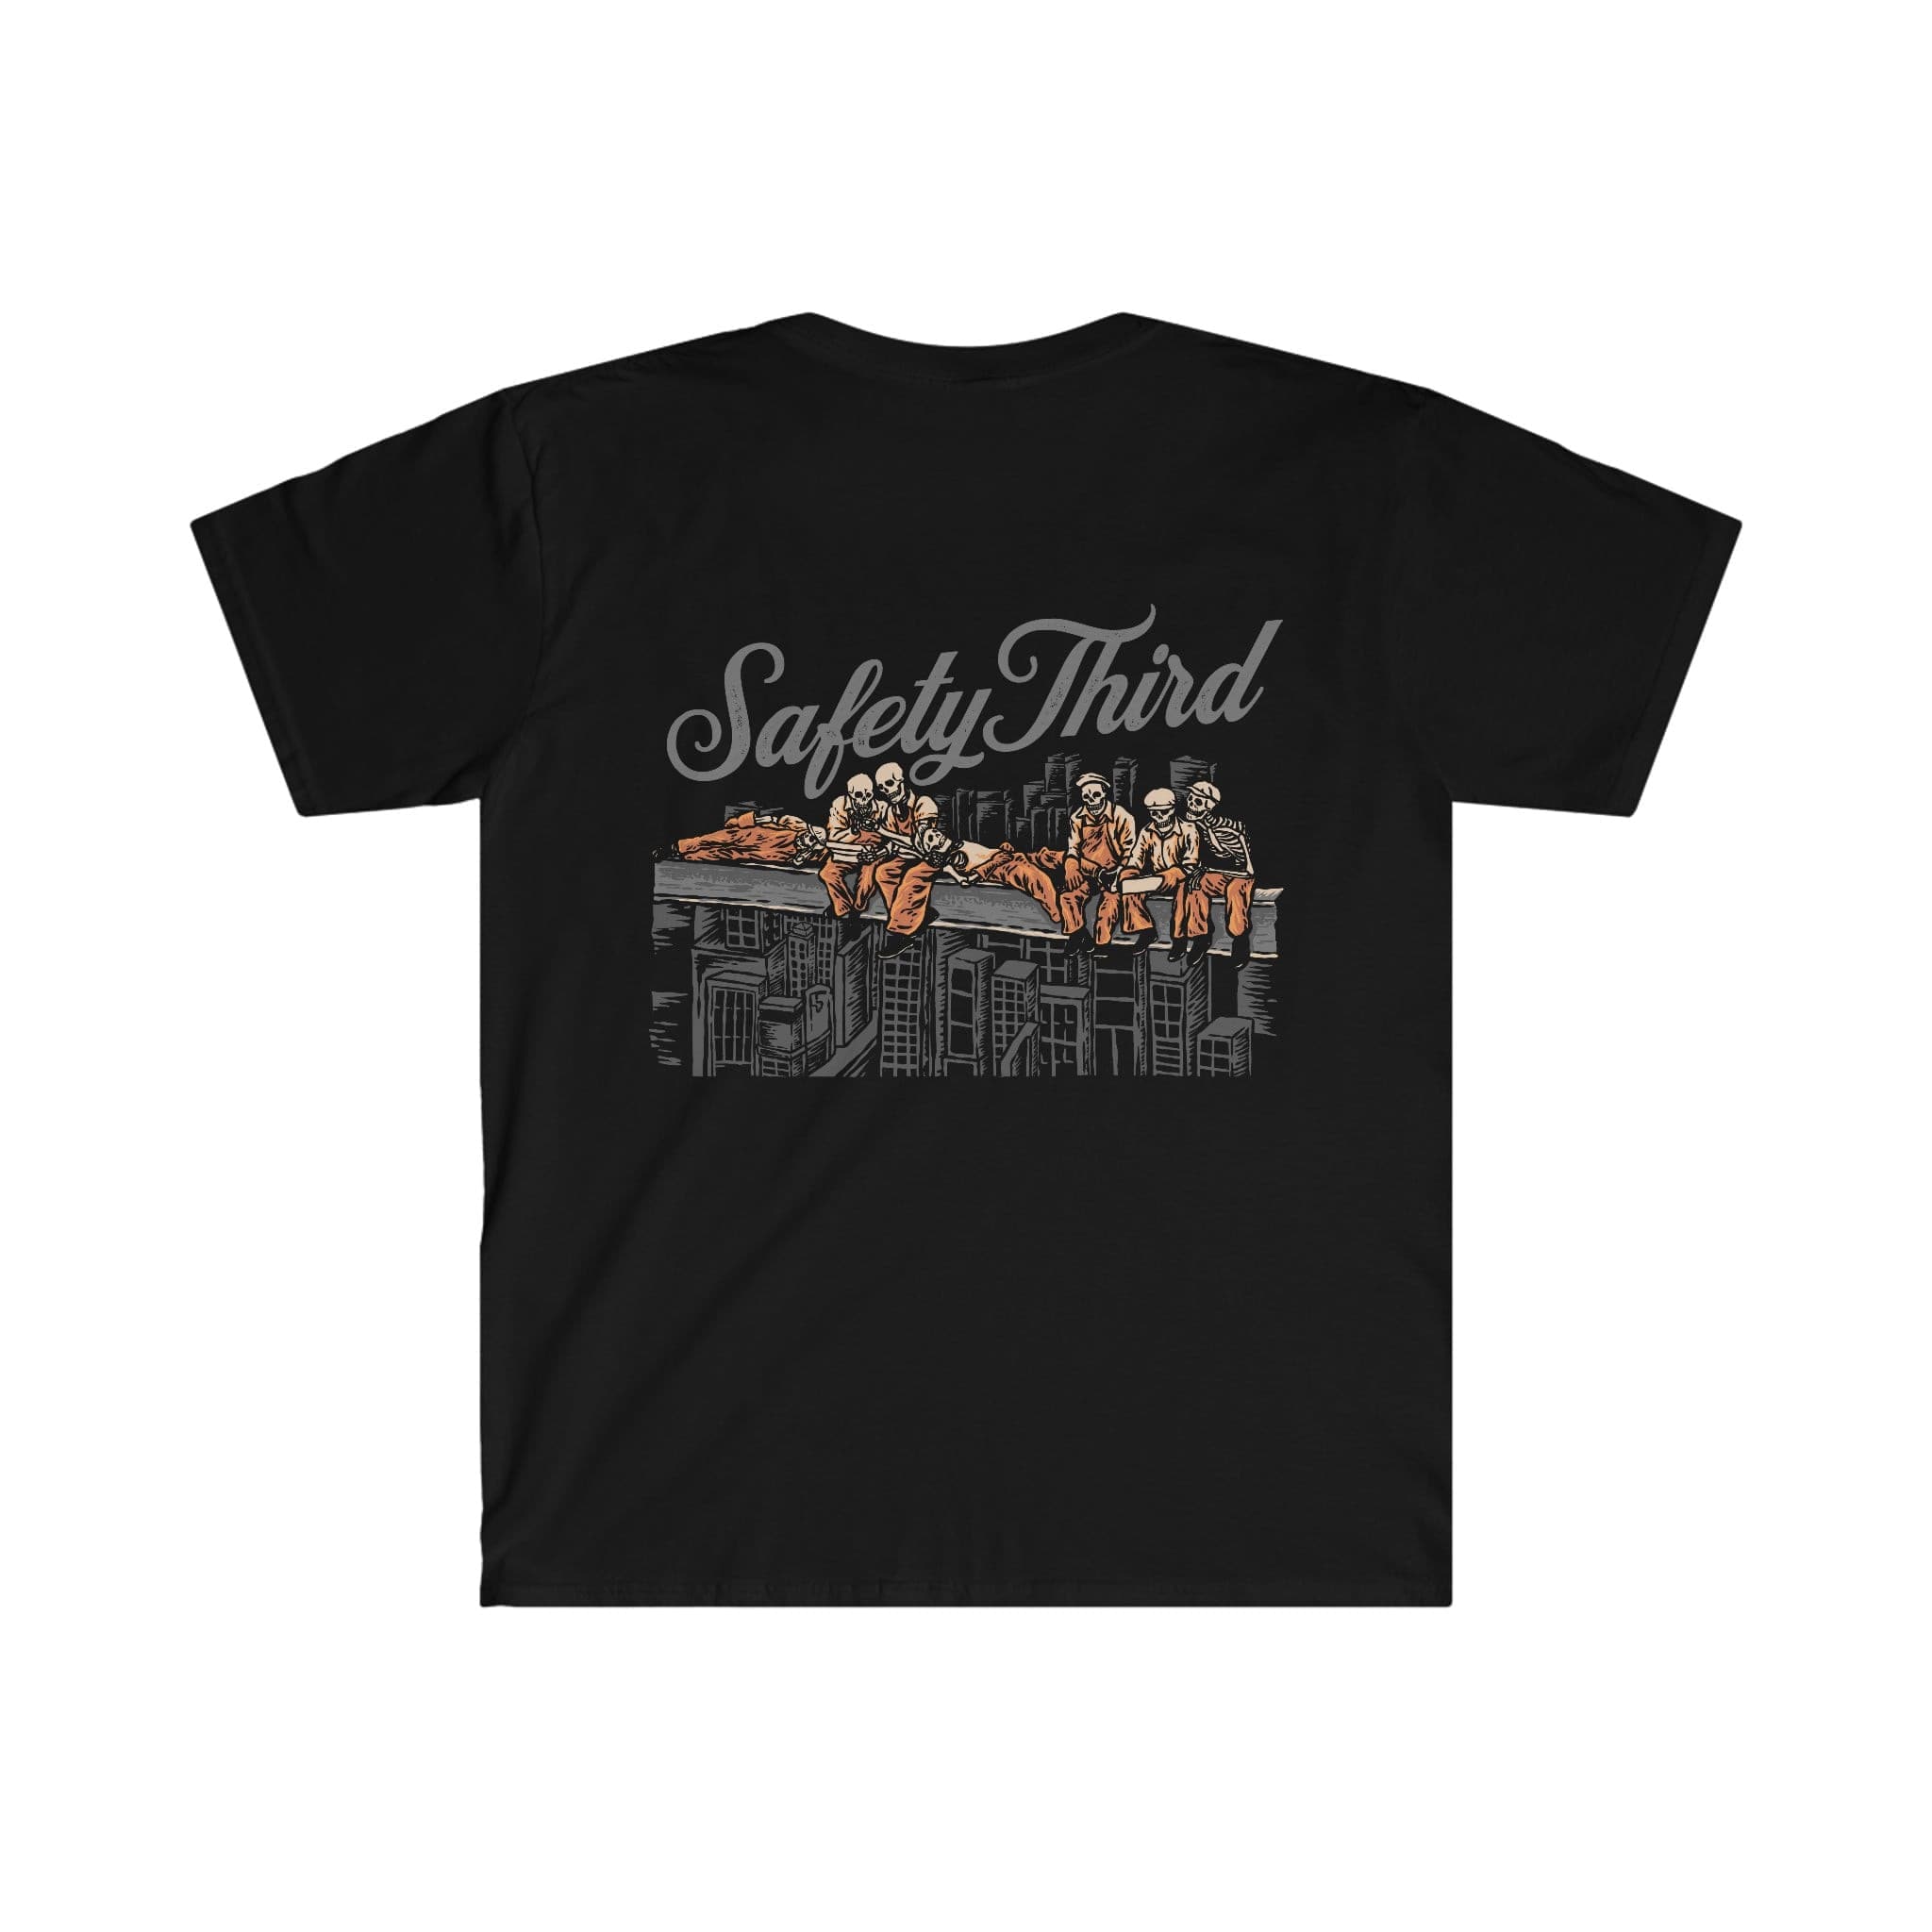 Safety Third - Tee - Workman Trading Co.